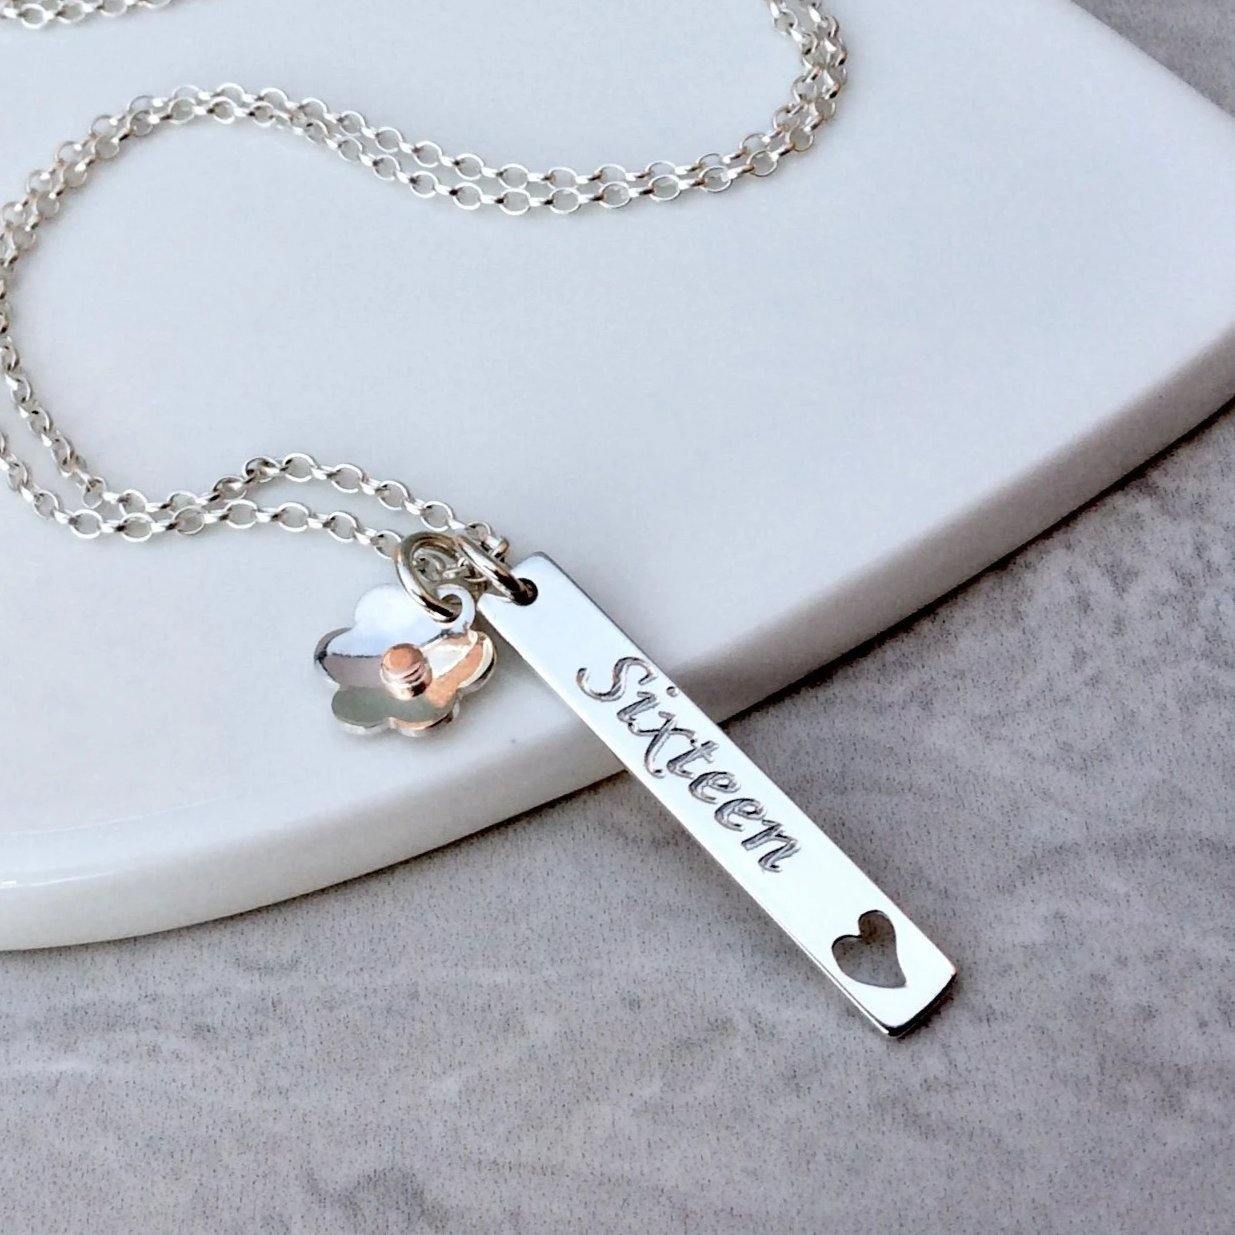 16th birthday necklace, a sterling silver bar pendant engraved with sixteen on the front and the birthday girls name on the back. A silver flower charm is also added to the chain and sits beside the bar.